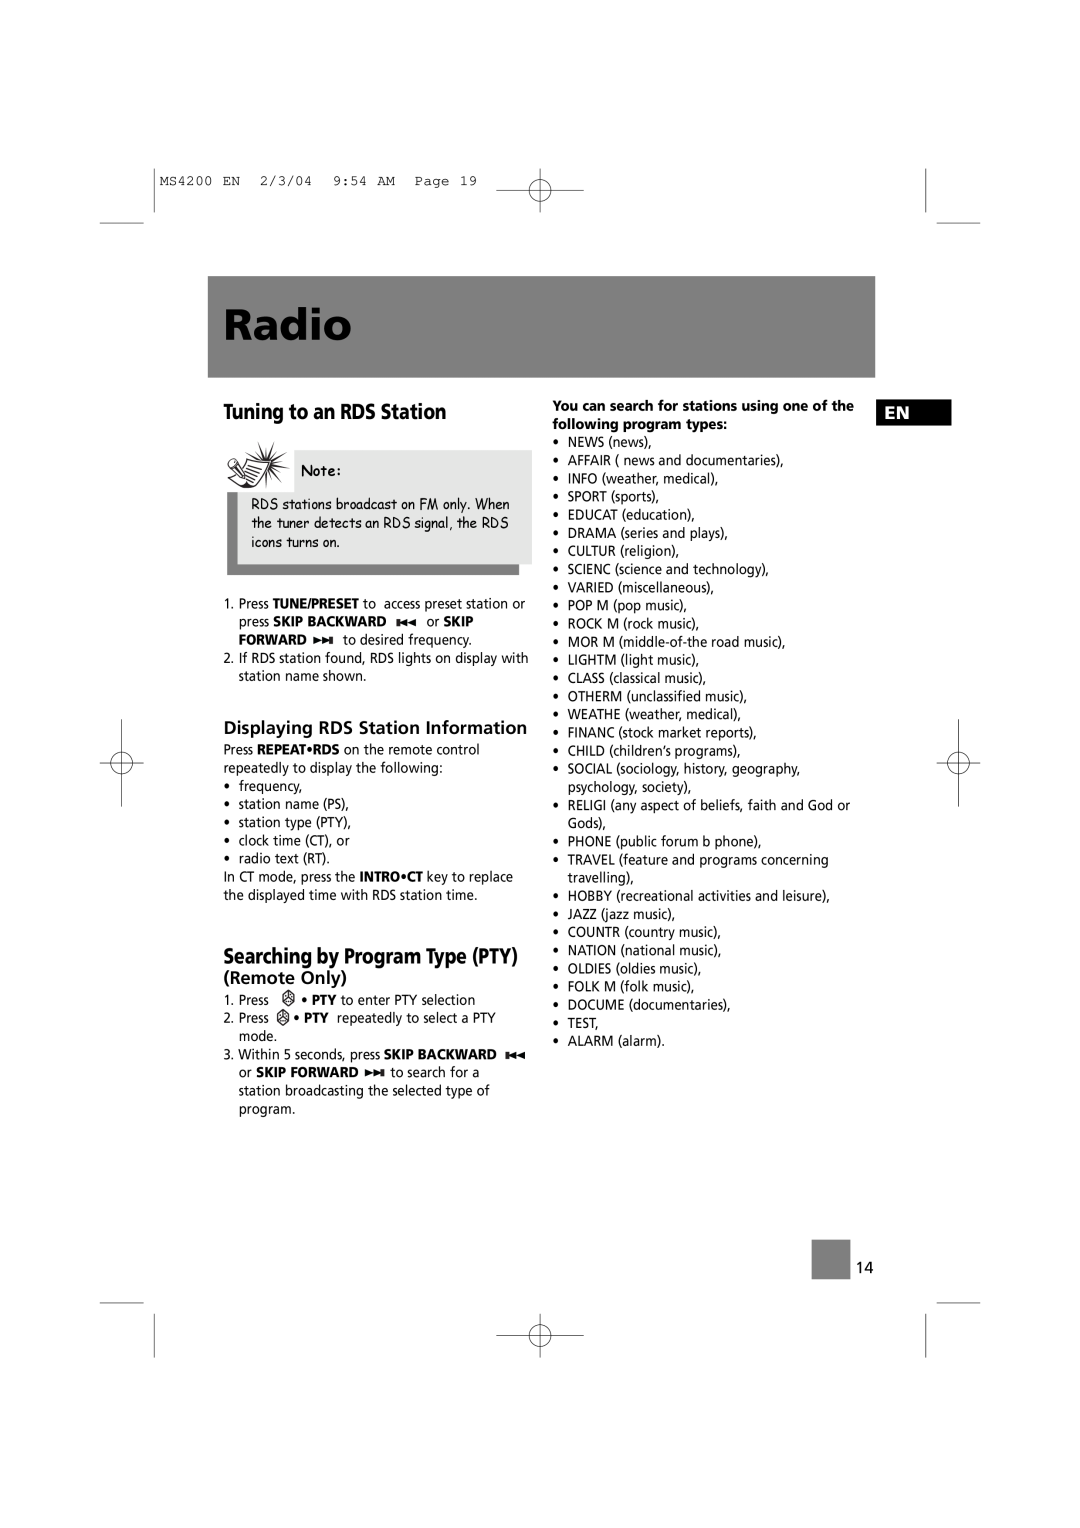 Technicolor - Thomson MS4200 manual Tuning to an RDS Station, Searching by Program Type PTY, Radio 